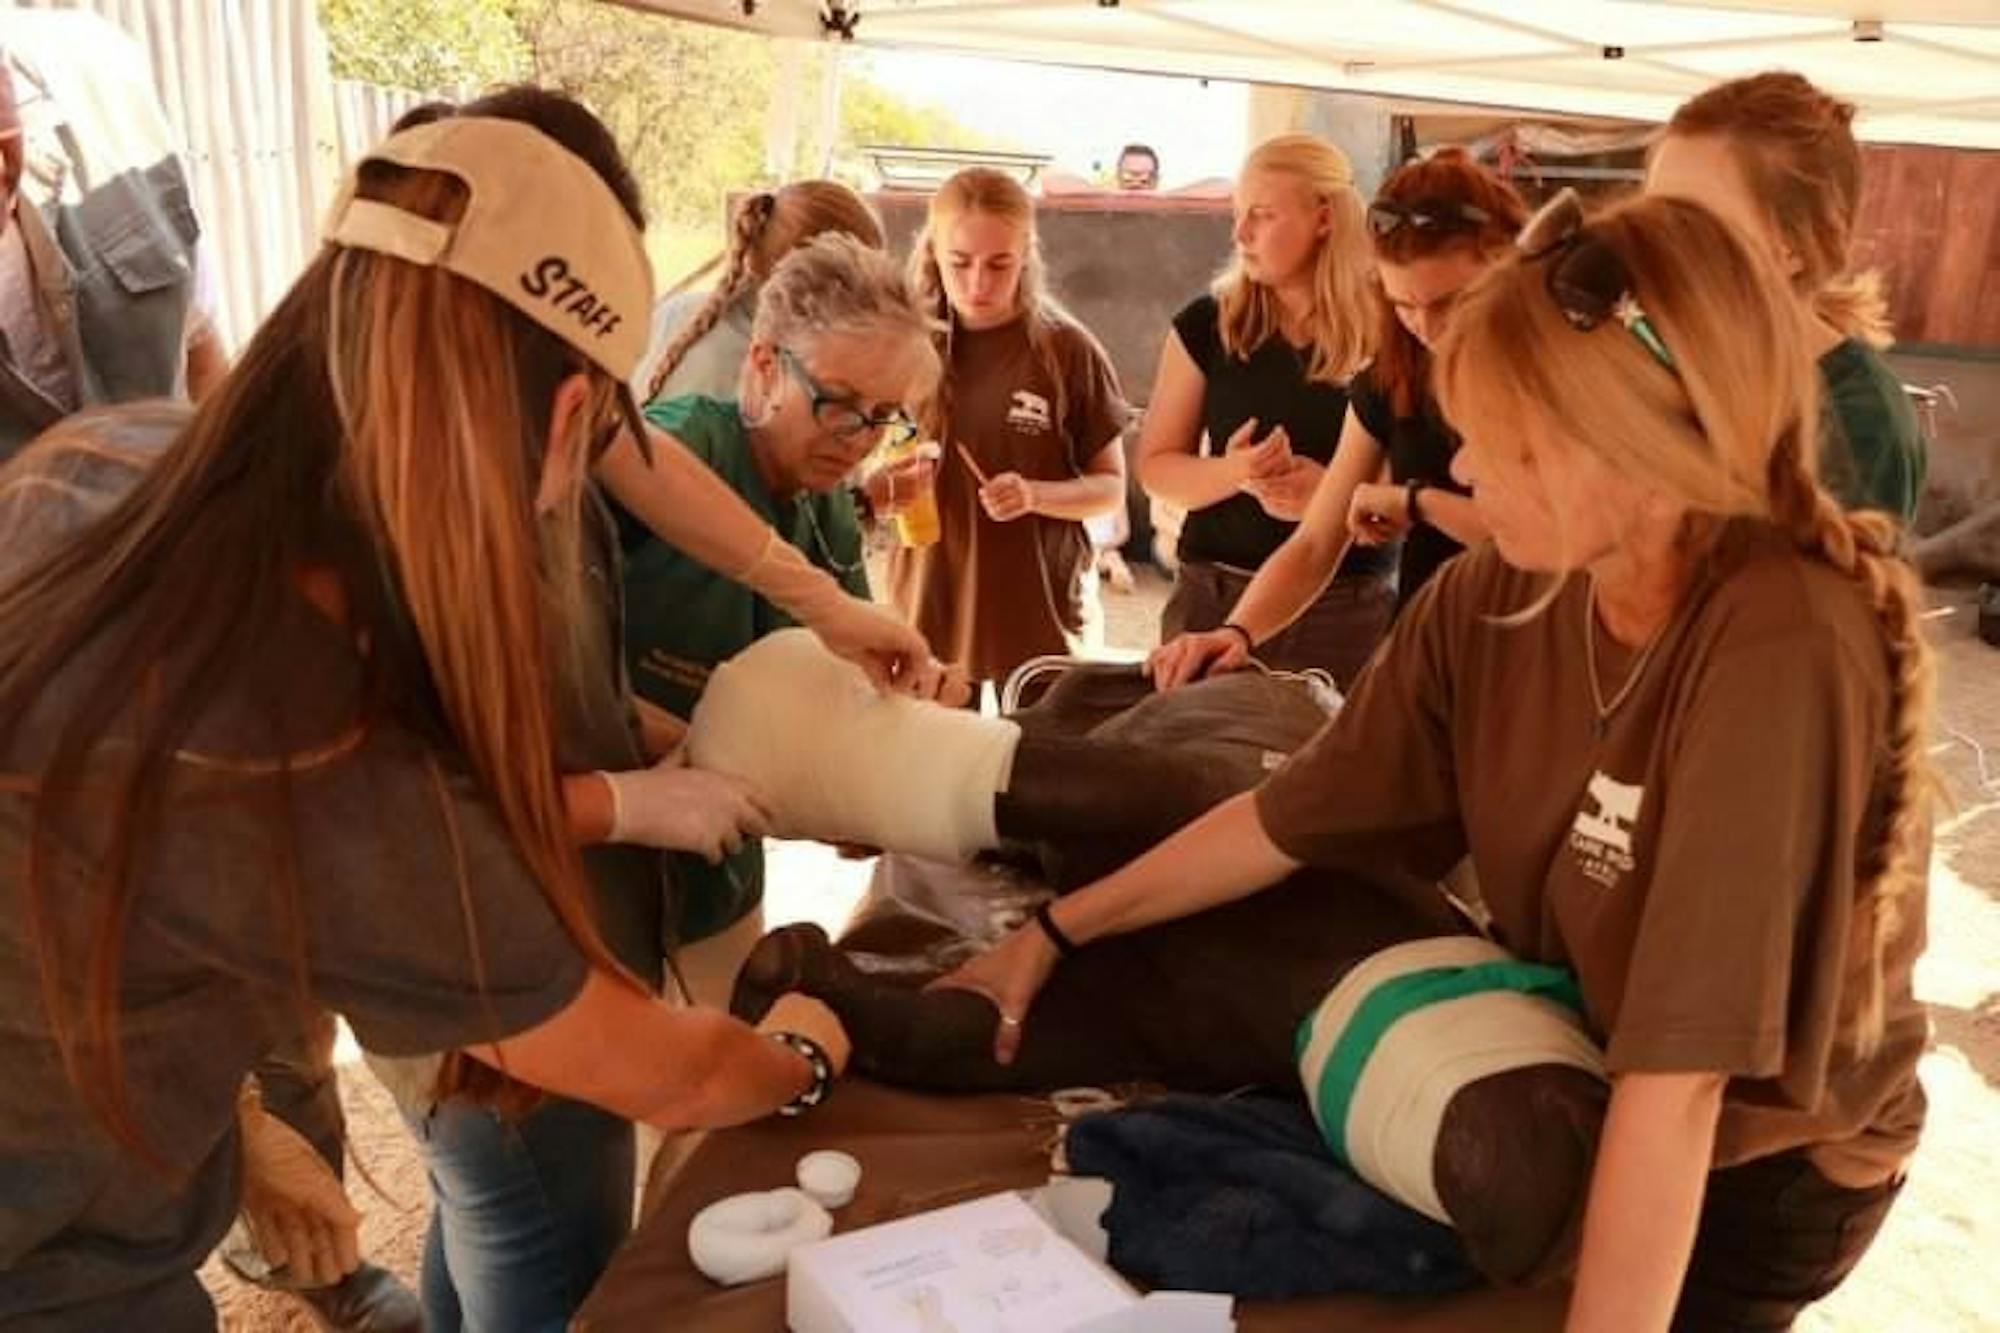 The Care for Wild team and Veterinarian Dr Albertus Coetzee hard at work treating Arthur, just days after his arrival